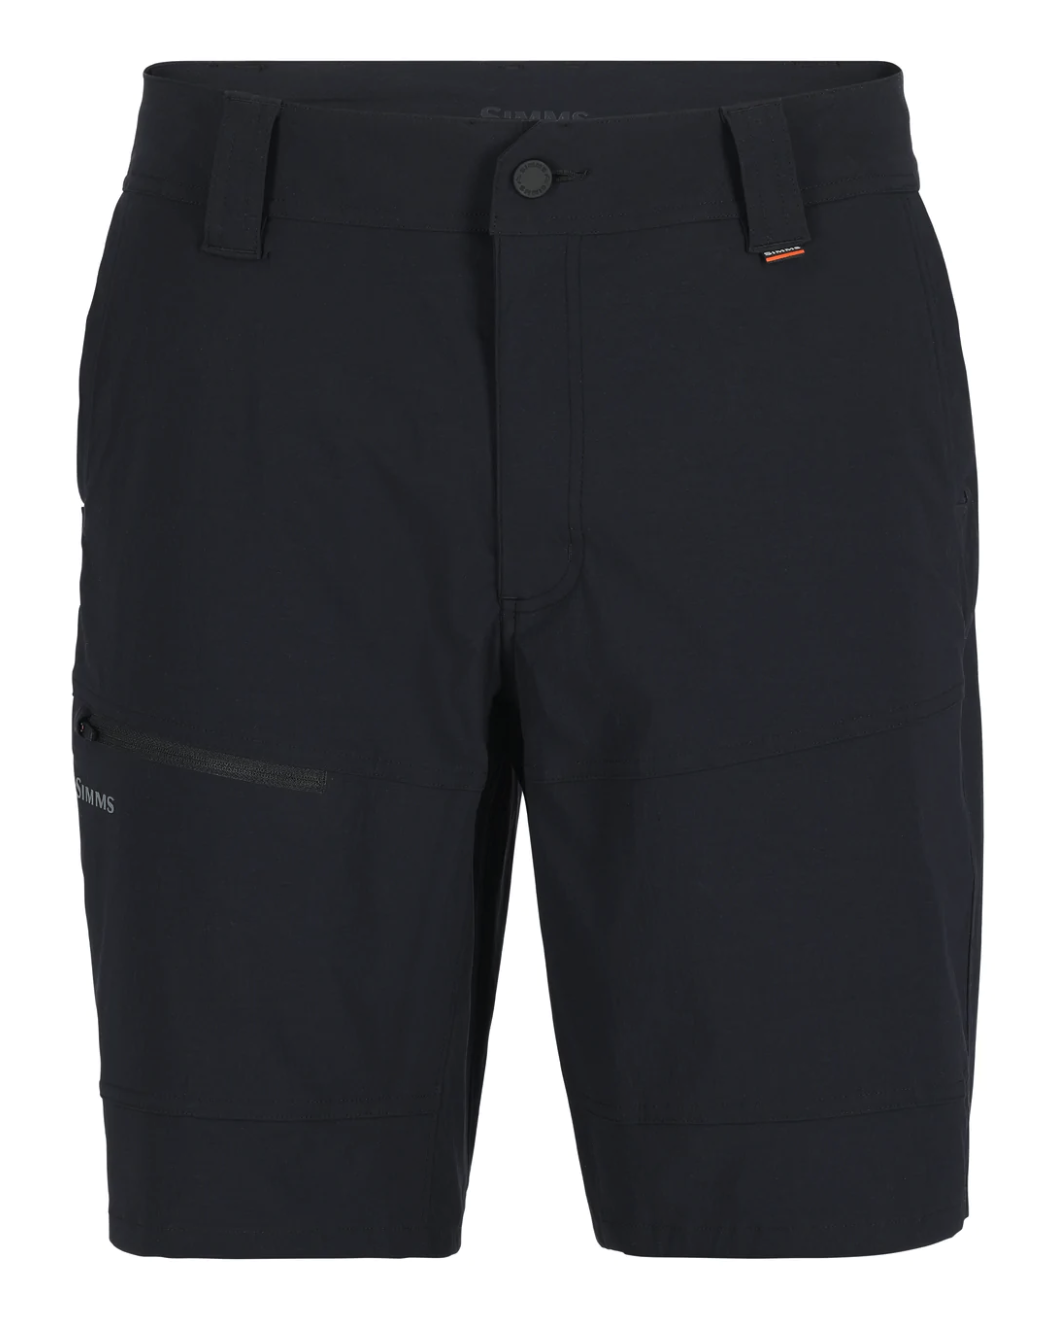 https://www.theflyfishers.com/Content/files/Simms/Shorts/GuideShorts/Black.png